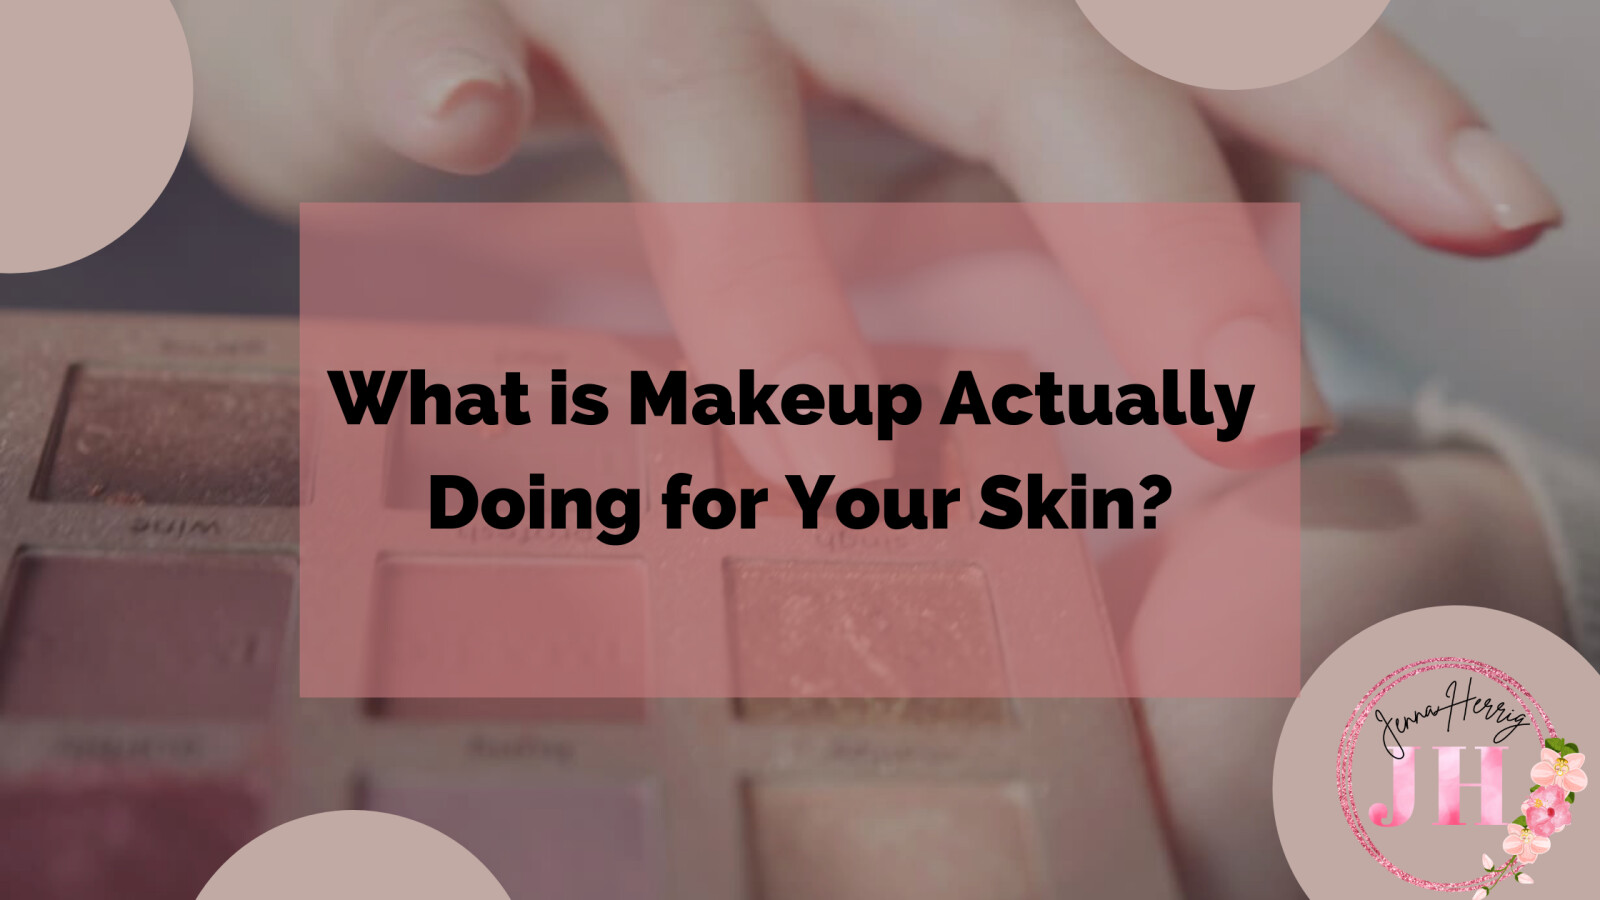 What is Your Makeup Actually Doing for Your Skin?